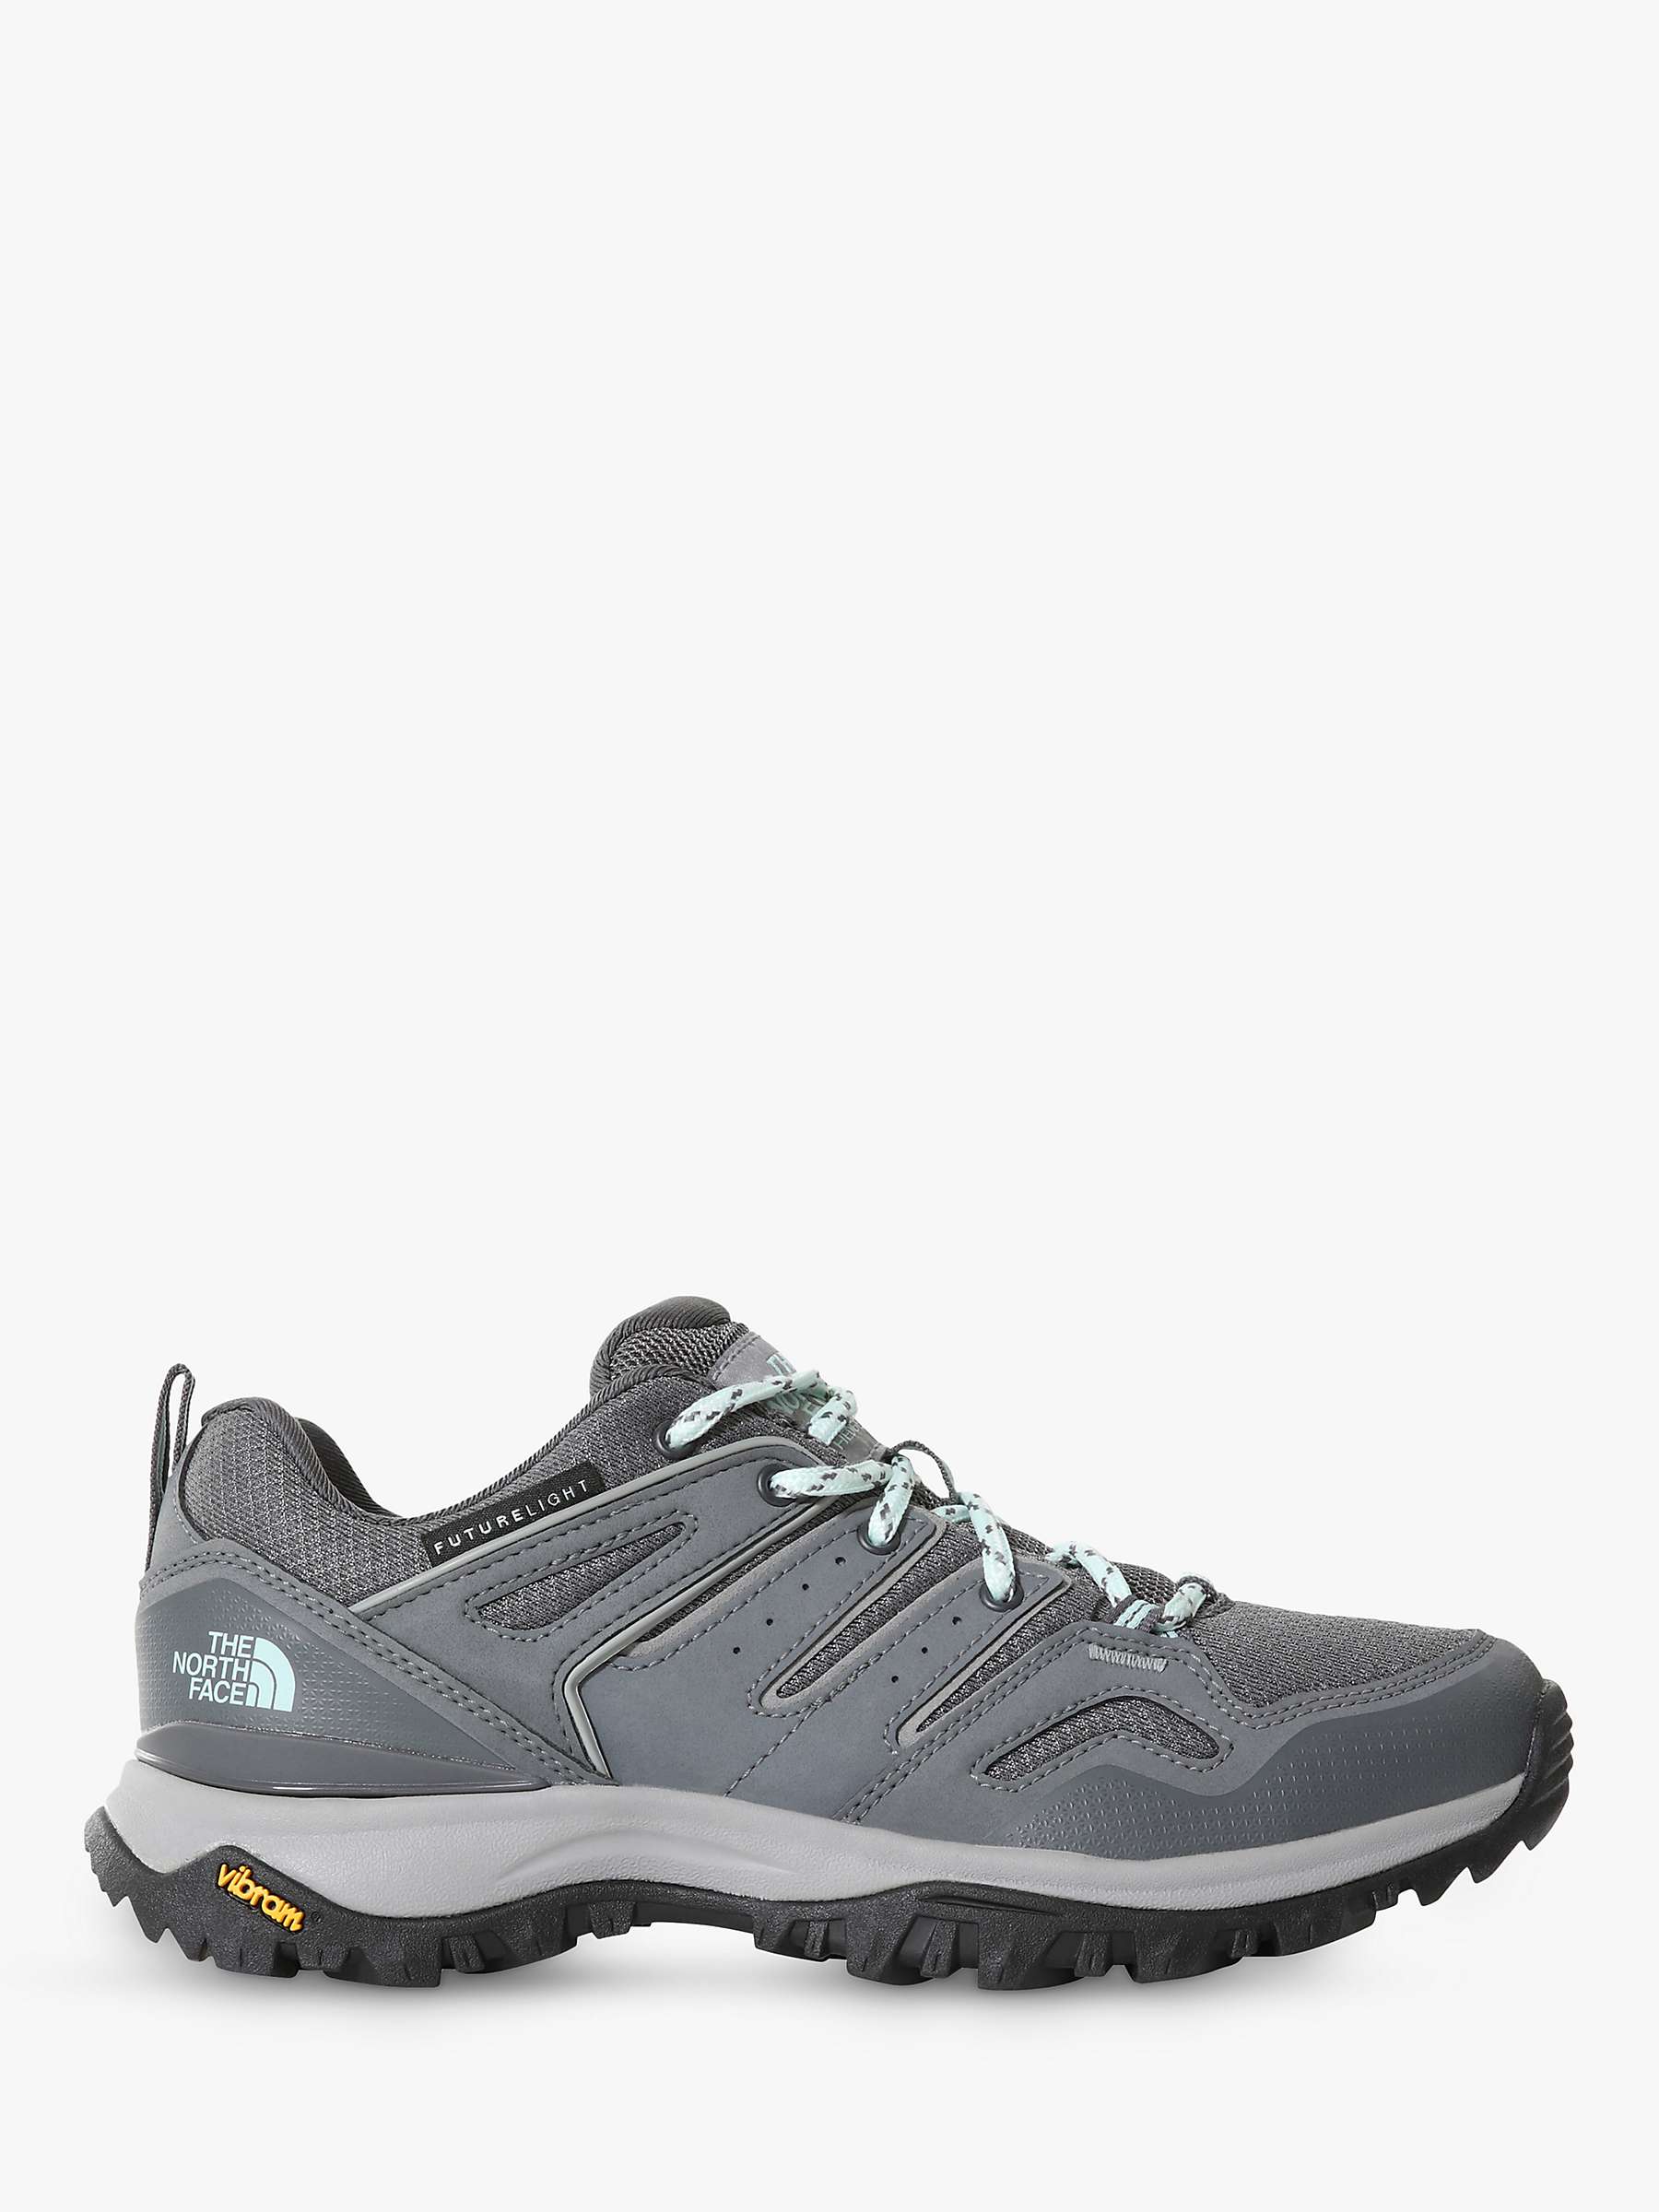 Buy The North Face Hedgehog Future Light Hiking Shoes, Grey Online at johnlewis.com